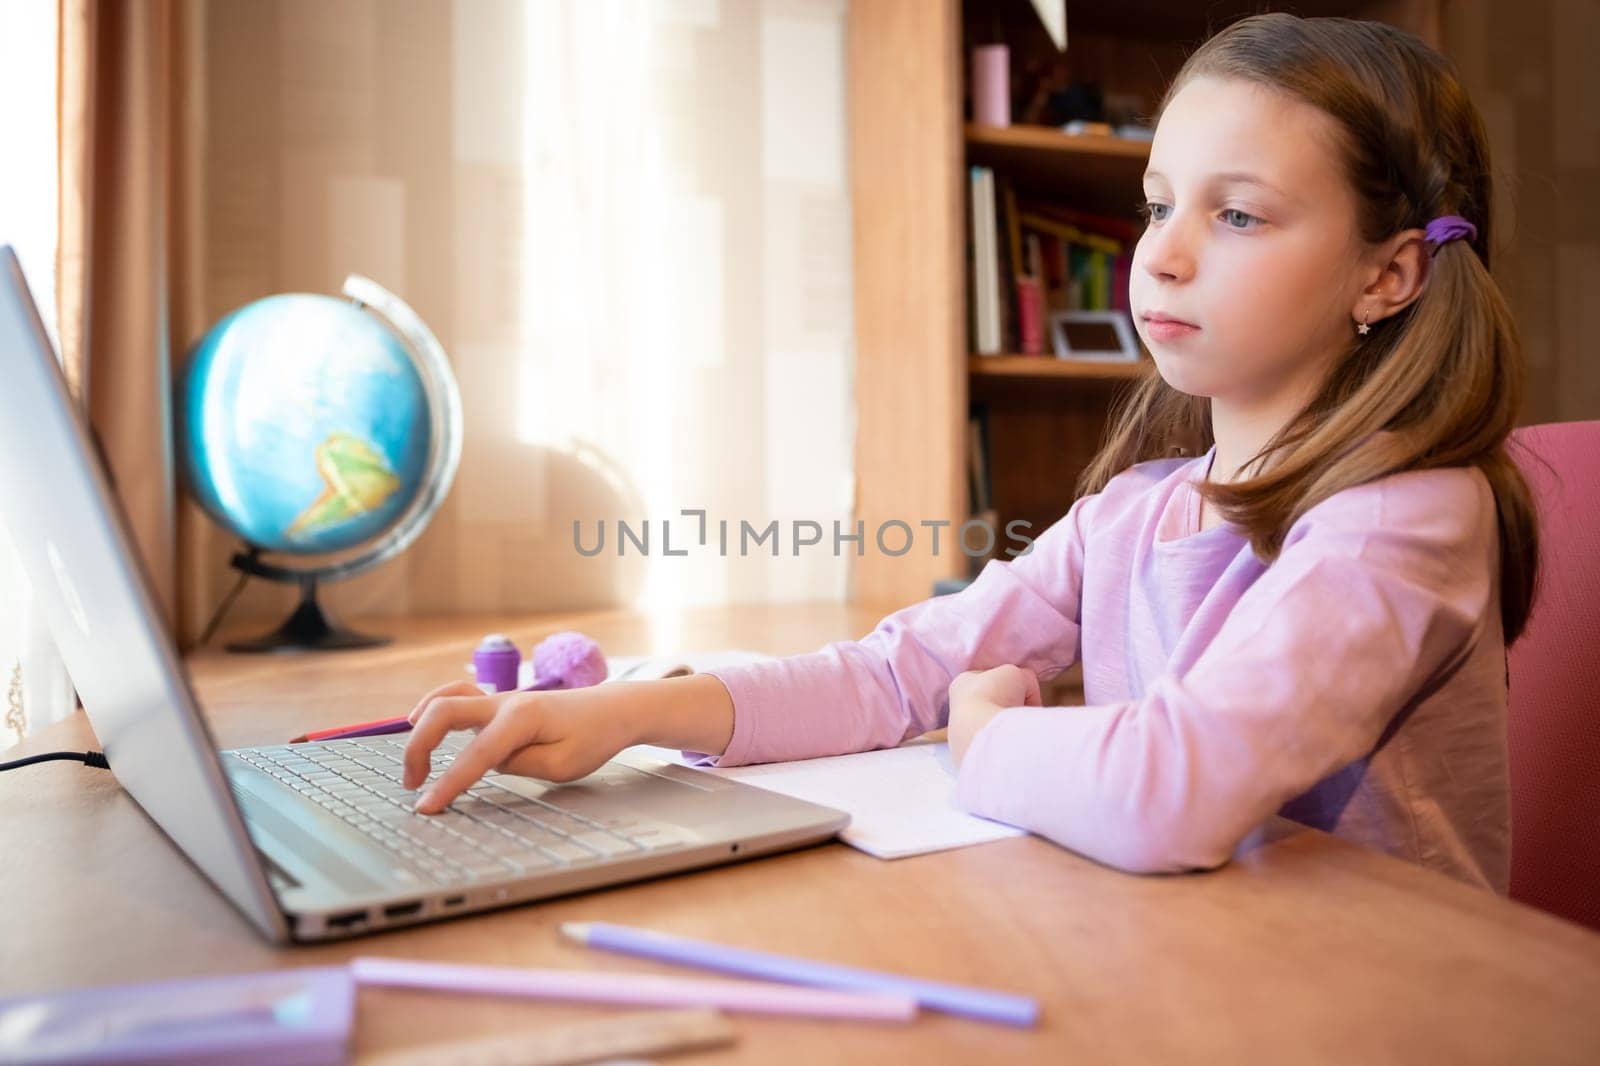 Online education of children. Girl schoolgirl teaches a lesson online using a laptop video chat call conference with a teacher at home.studying, participating in online conference, sitting at desk by YuliaYaspe1979